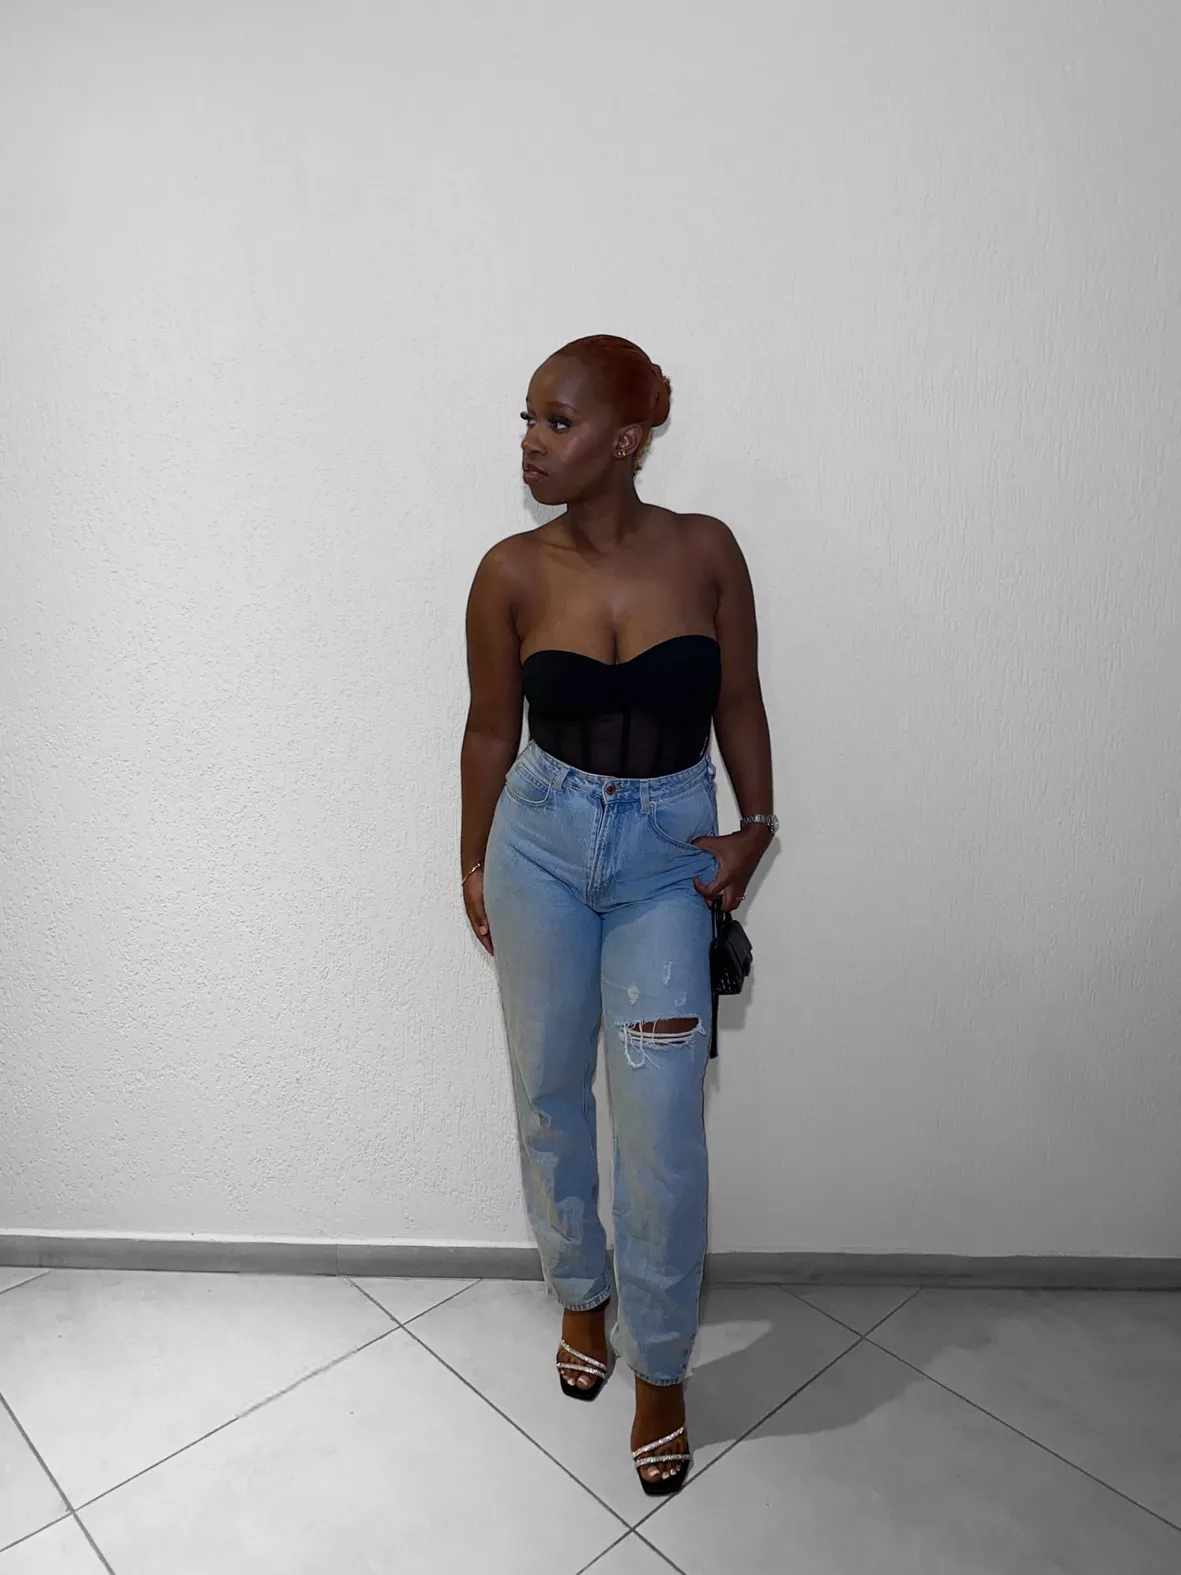 TREND ALERT: How To Style A Denim Corset Top! ✨